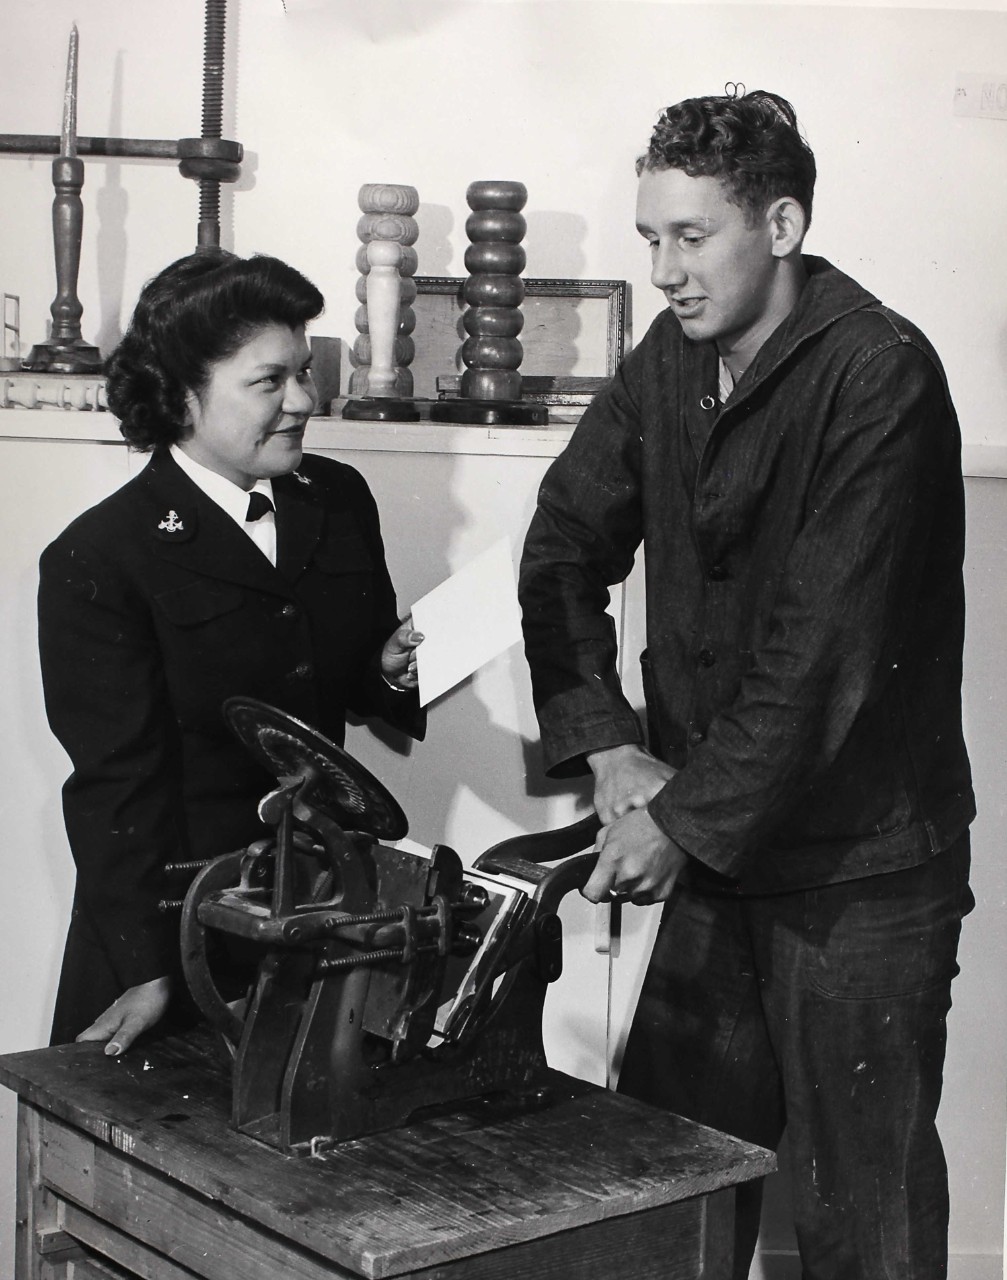 Woman in uniform assist a seaman in uniform with the use of a printing press. 